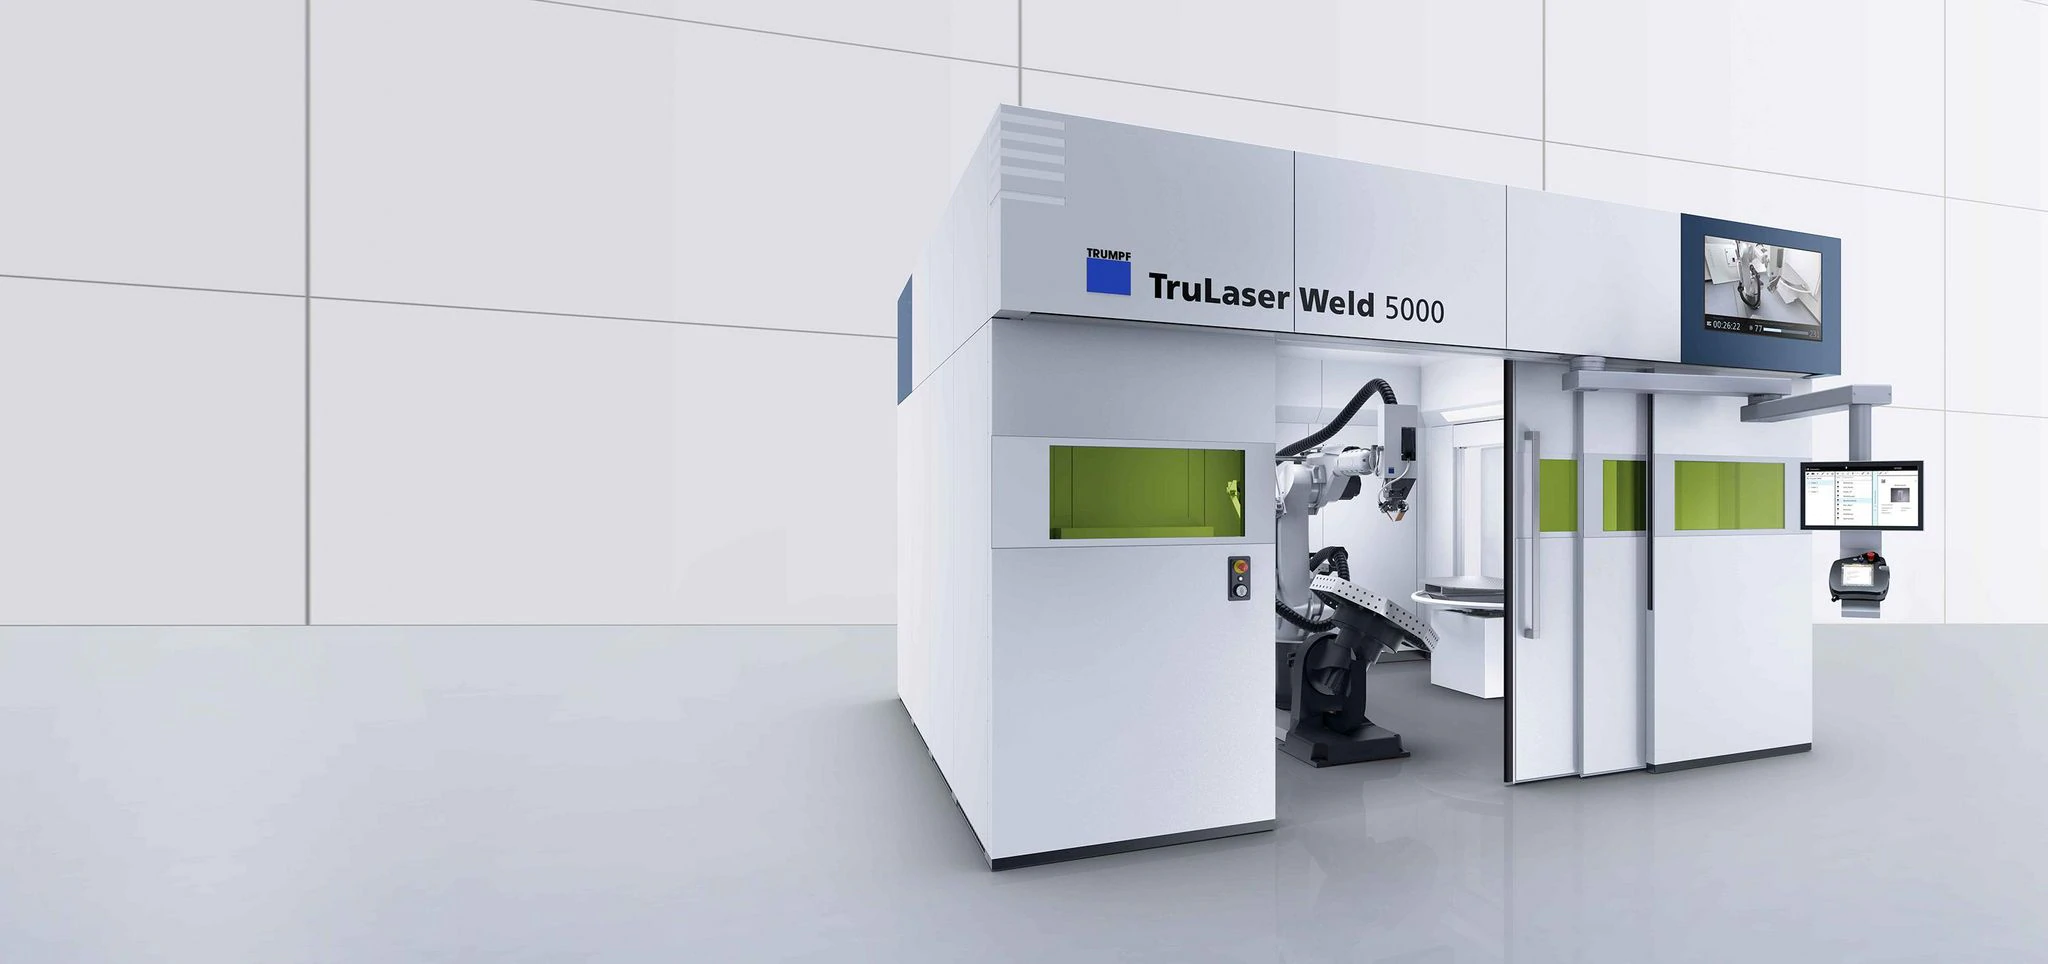 One system, countless benefits
Robots, lasers, processing optics, enclosed protective housing, and positioners – TruLaser Weld 5000 is a turn-key system for automatic laser welding. You can flexibly weld deep and strong seams or nicely rounded, smooth seams using one system. FusionLine also enables you to connect components with gaps. The versatile system can be precisely tailored to meet your needs with different component positioners.
 
 